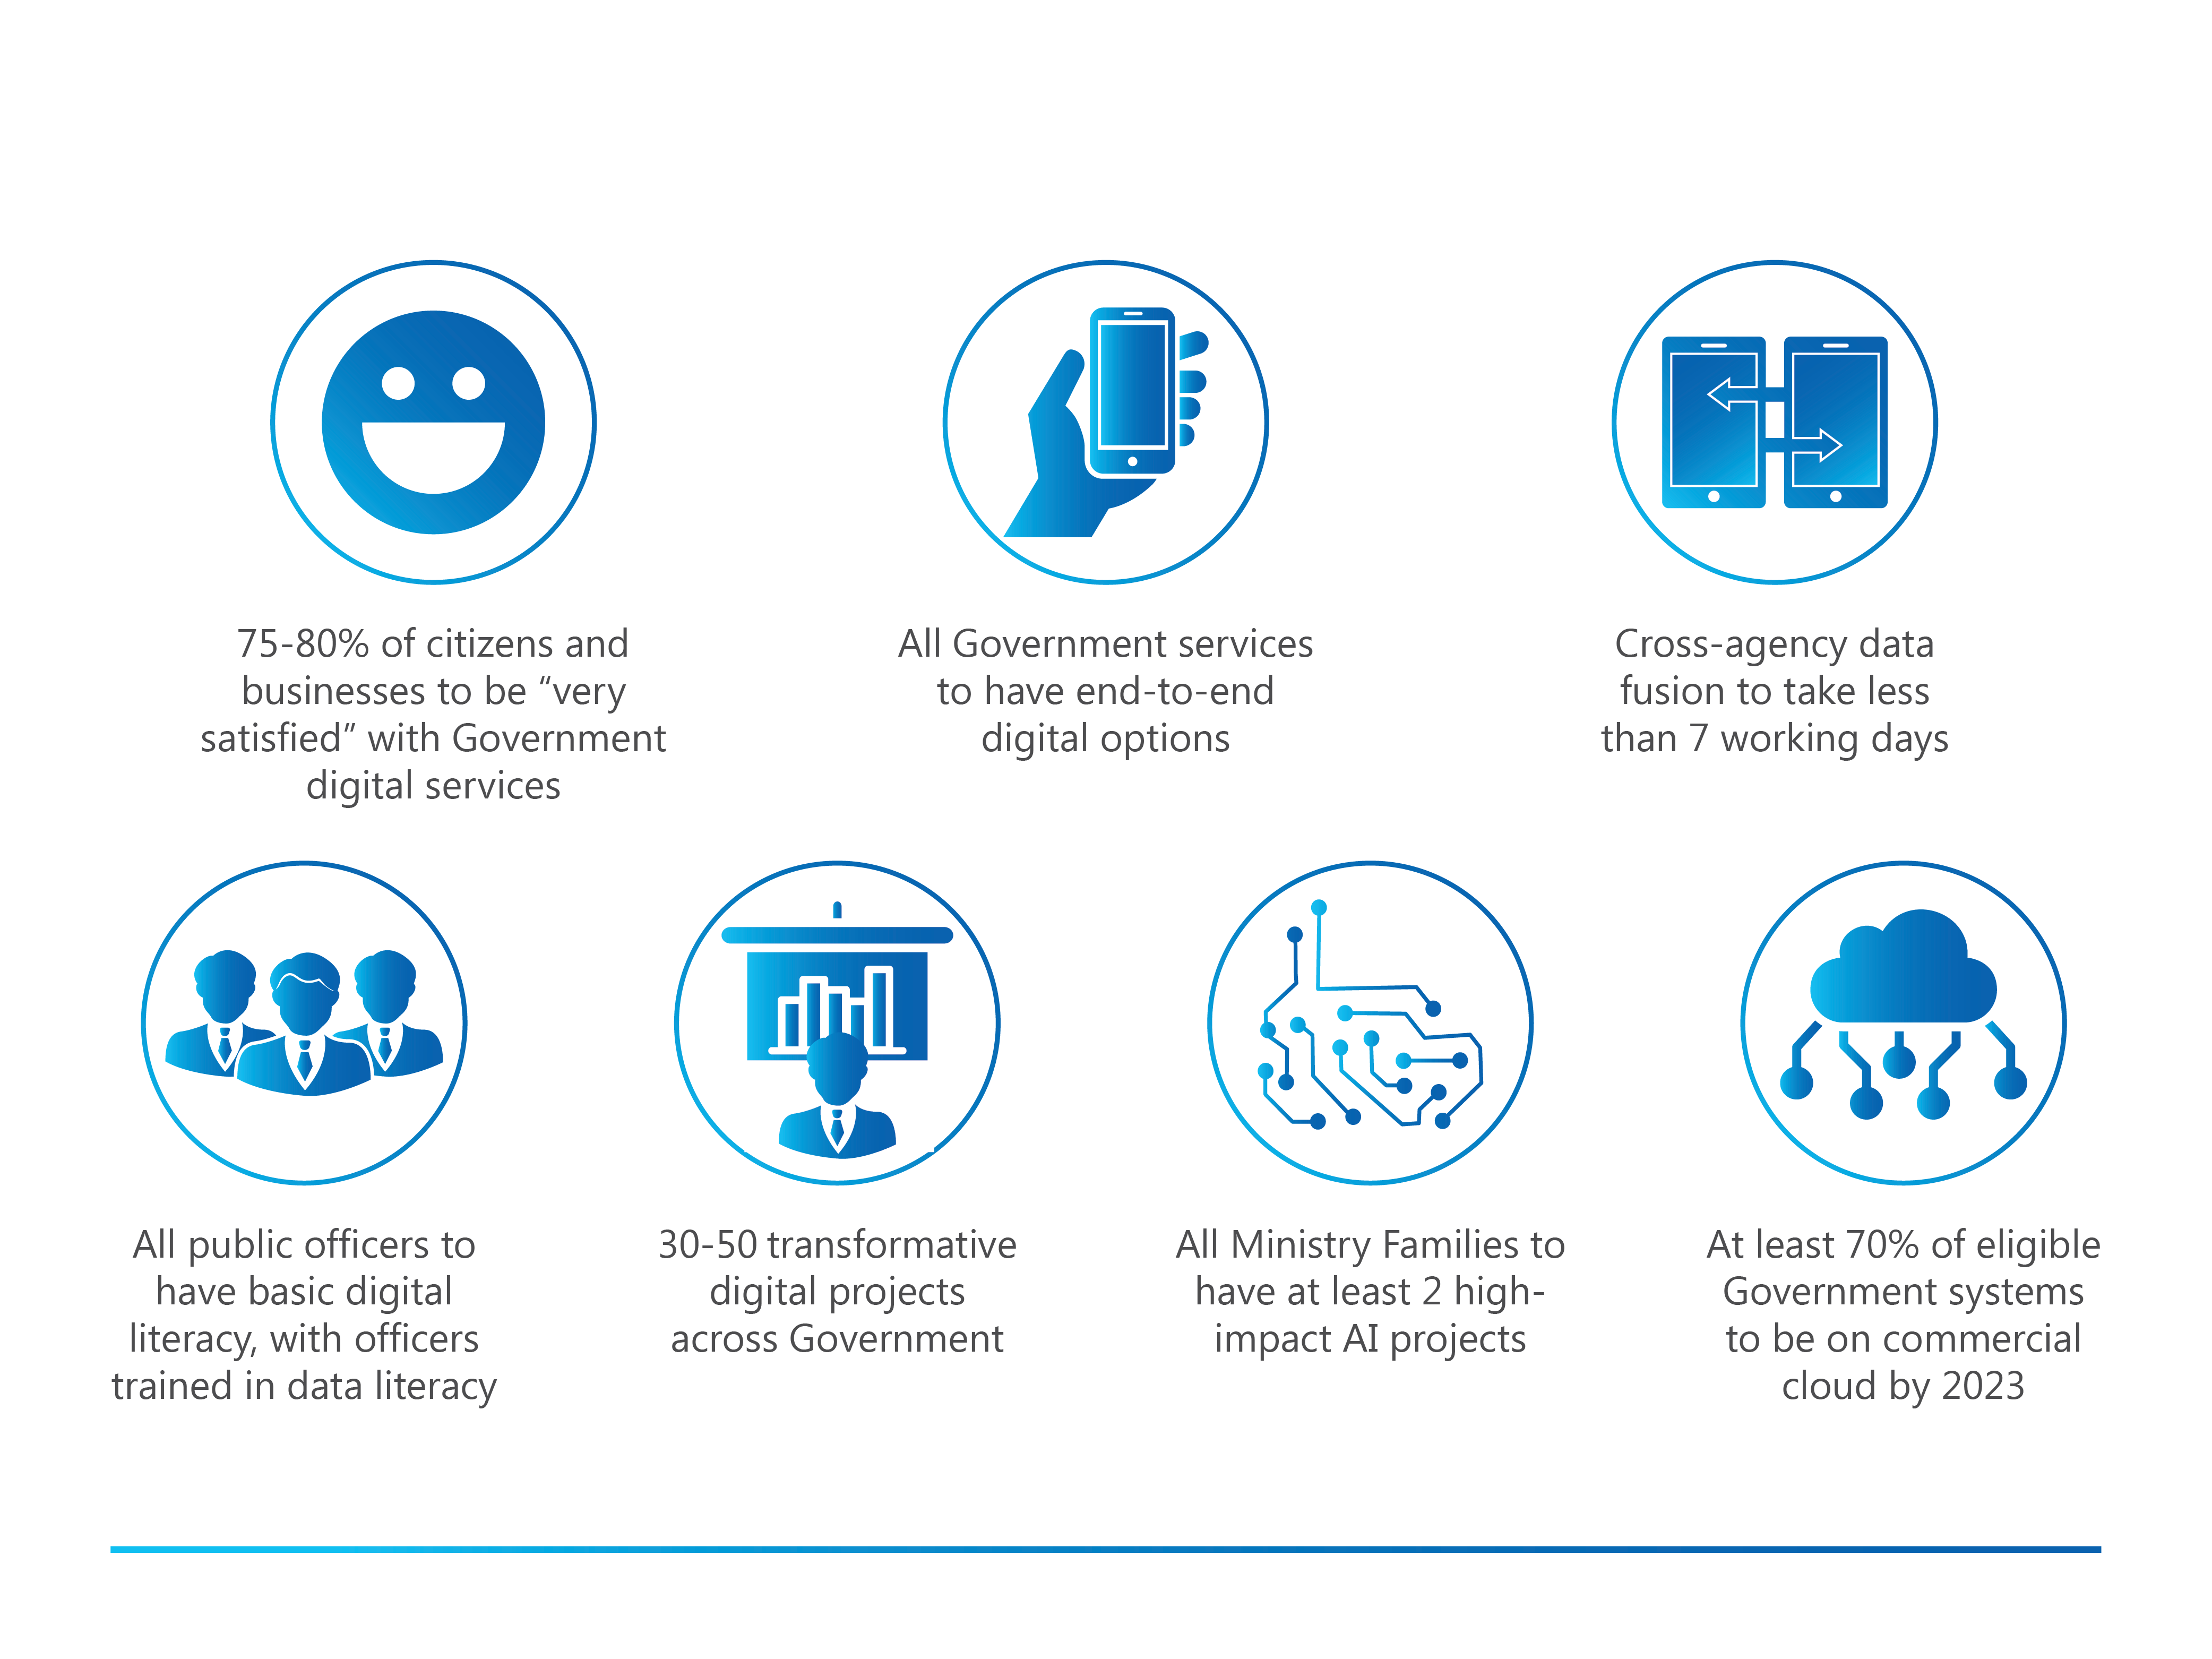 Fig 4: Singapore’s Digital Government Goals (to be achieved by 2023)